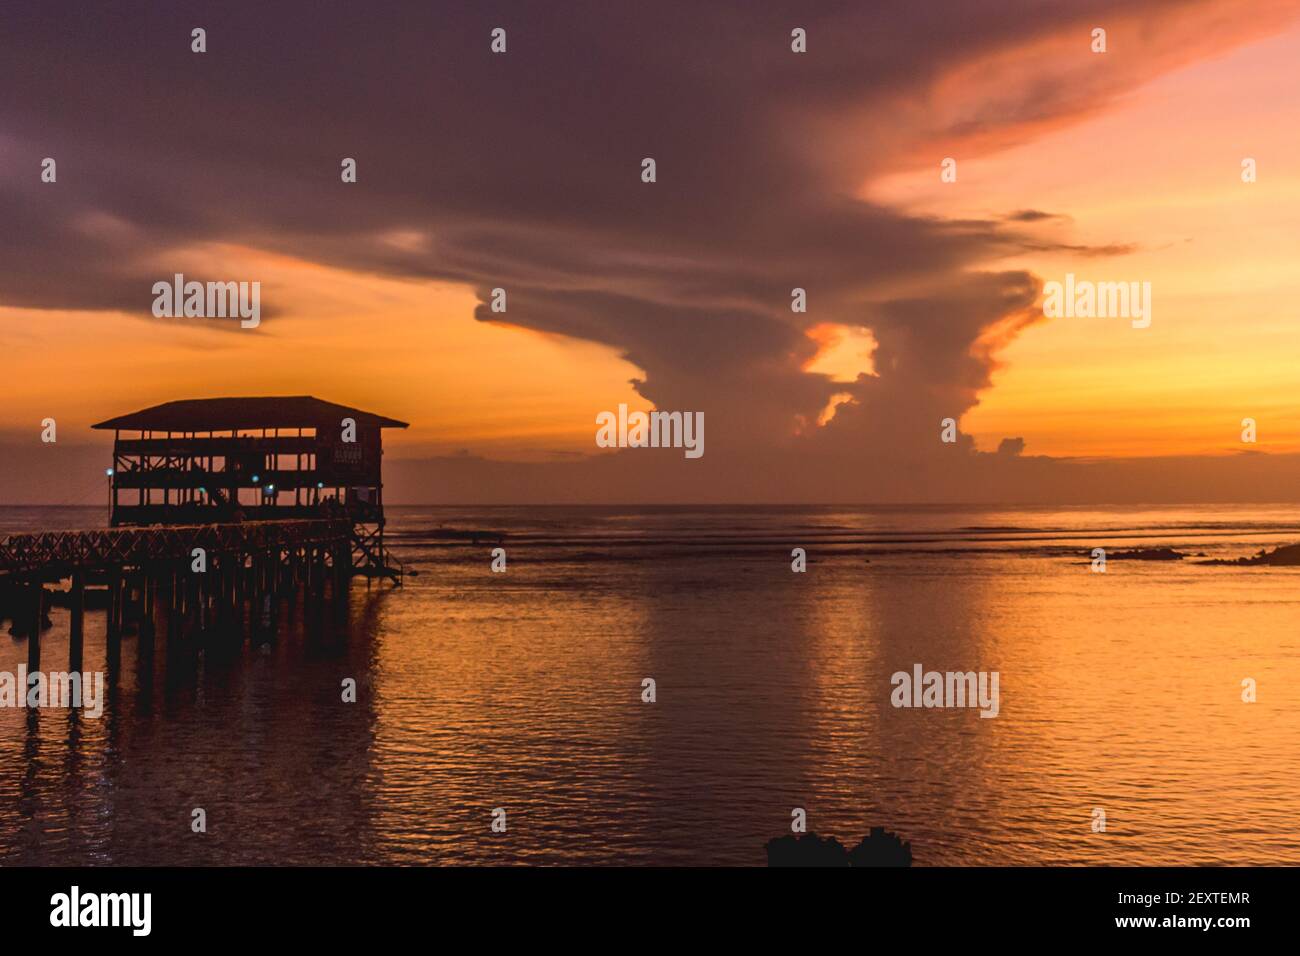 Cloud 9 Cloud9 Tower Surf Spot Siargao Island The Philippines Stock Photo